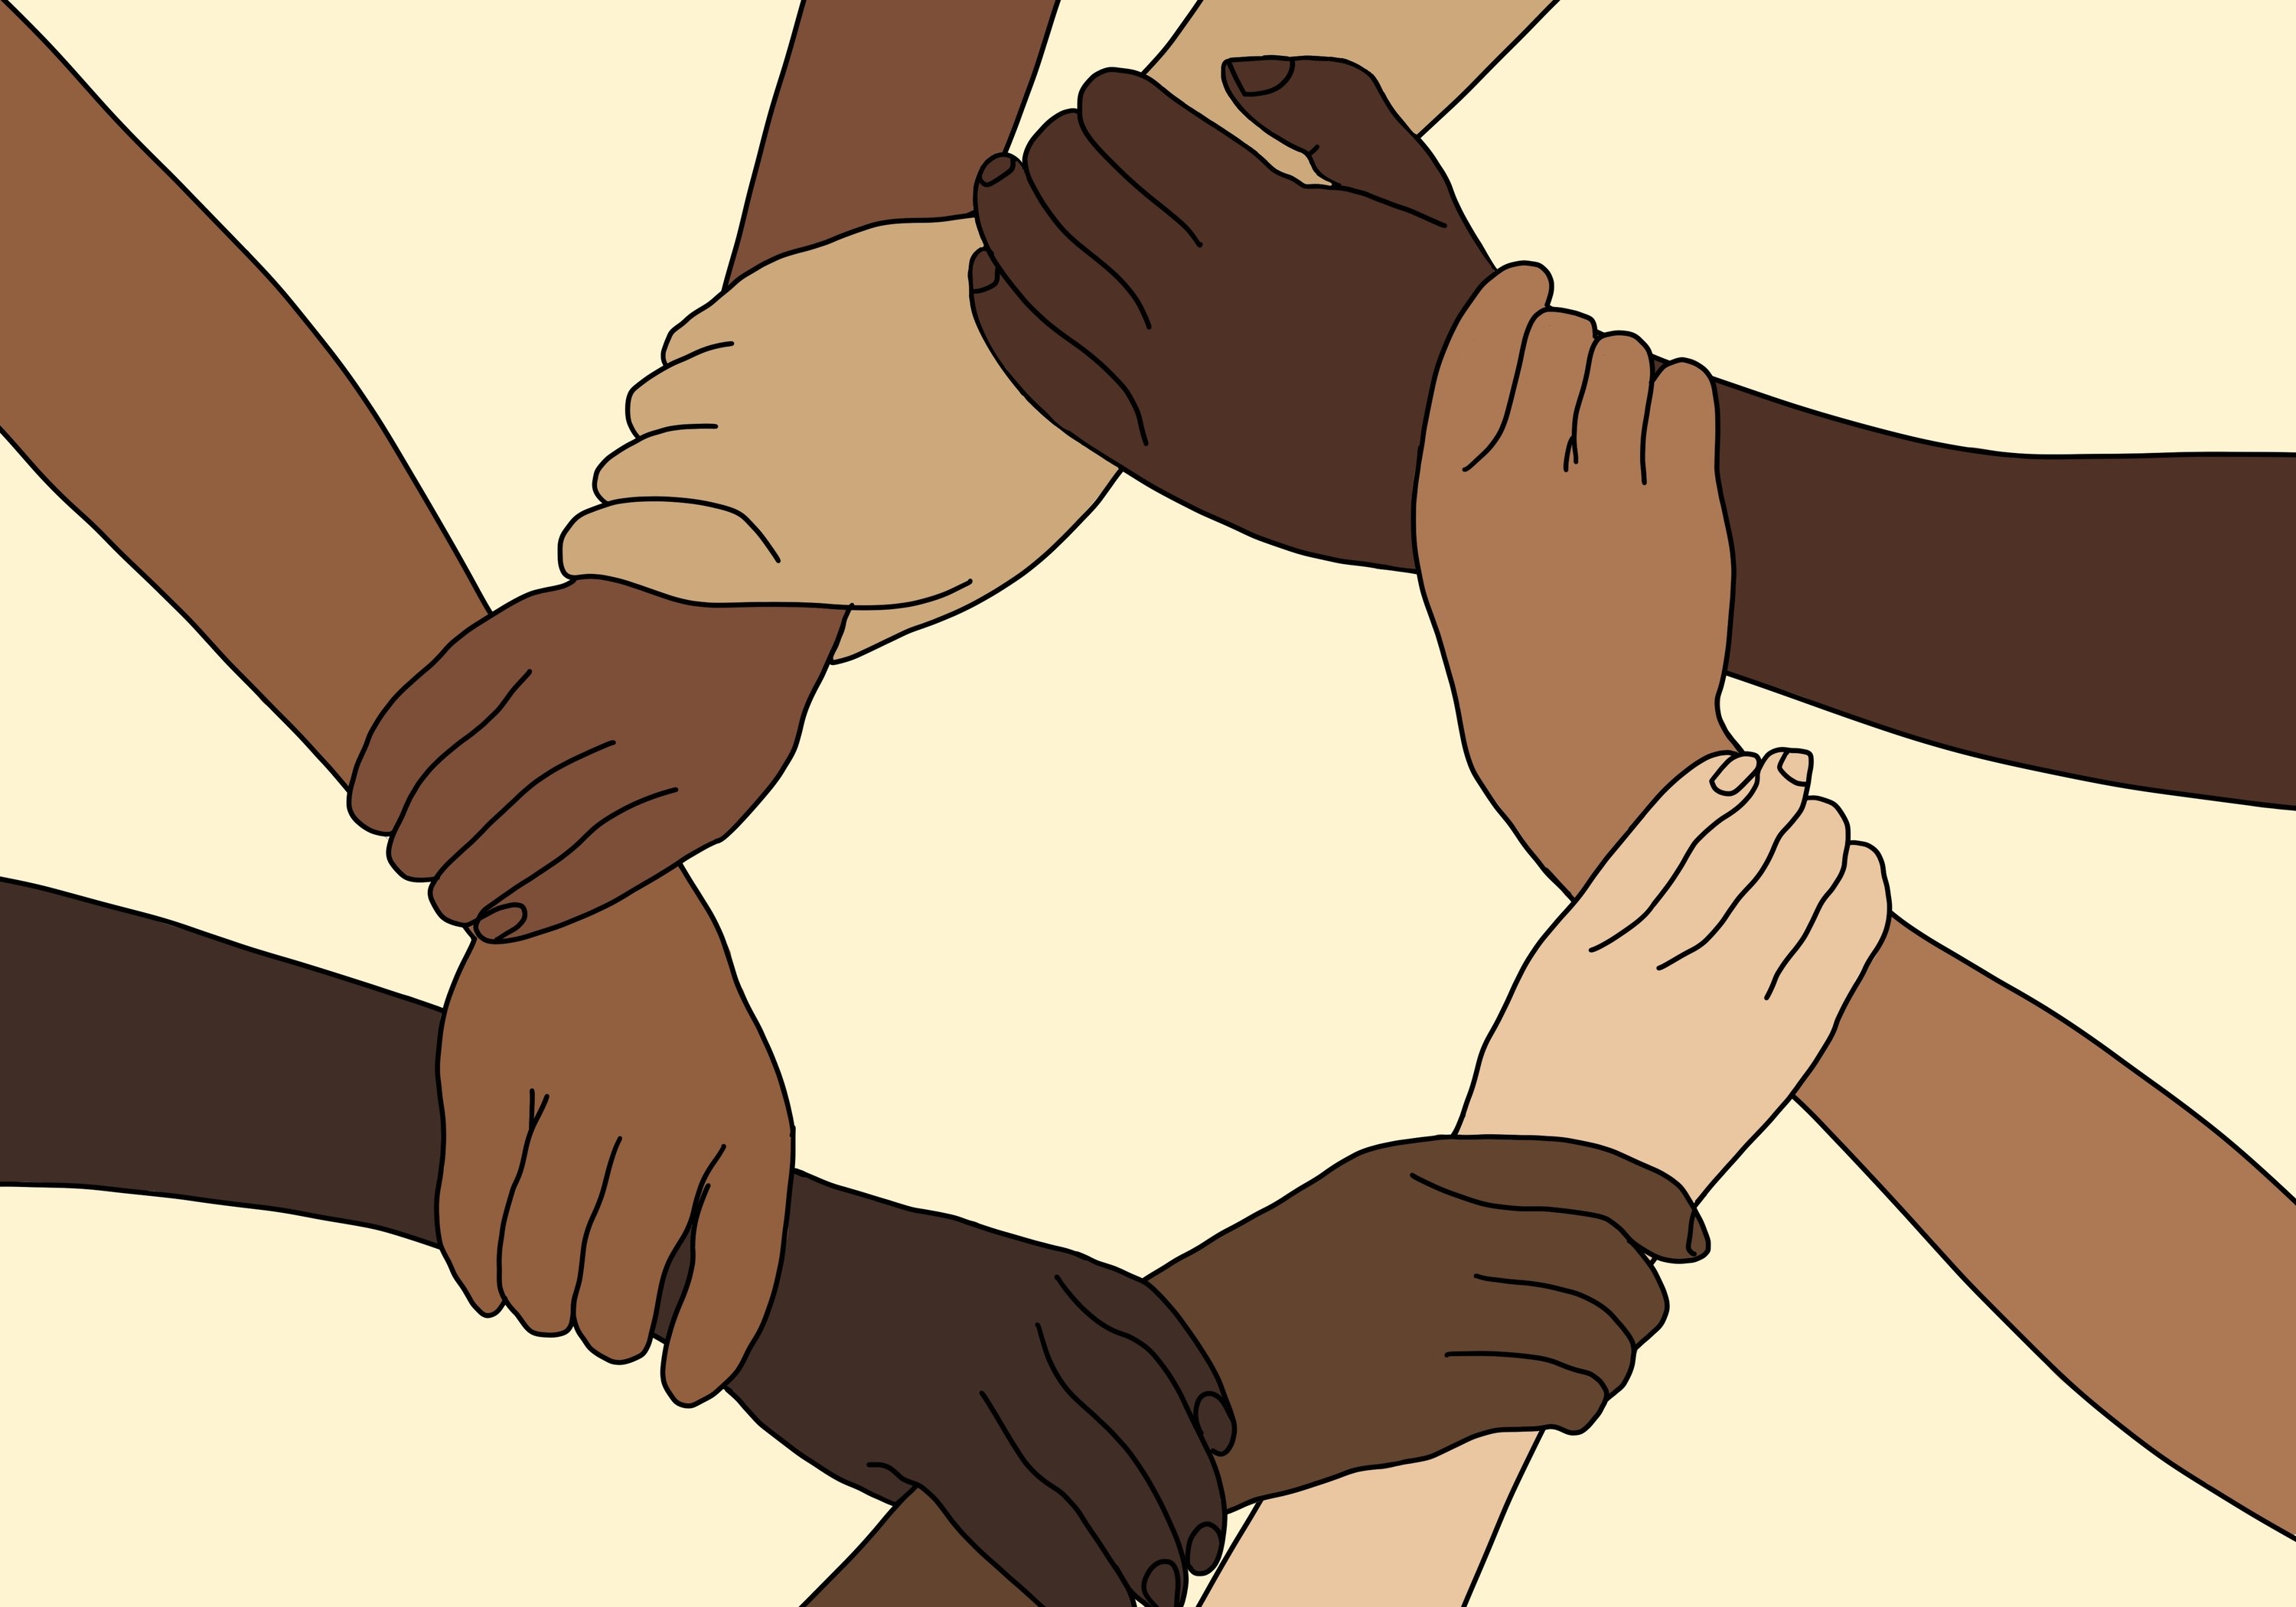 a collection of black and brown hands hold each other